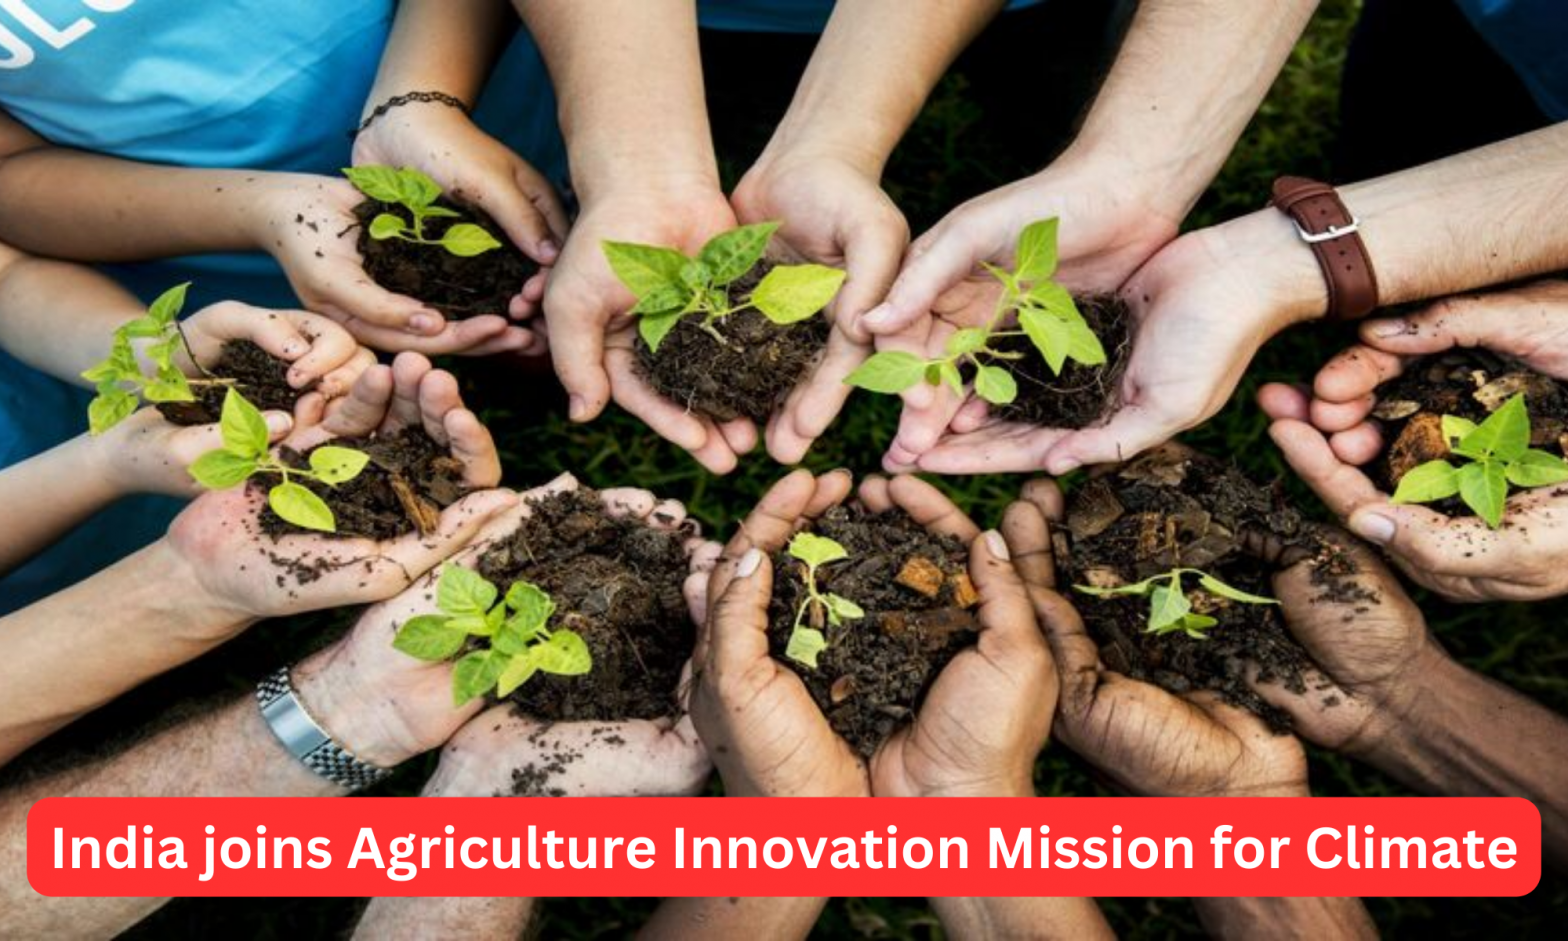 India joins Agriculture Innovation Mission for Climate